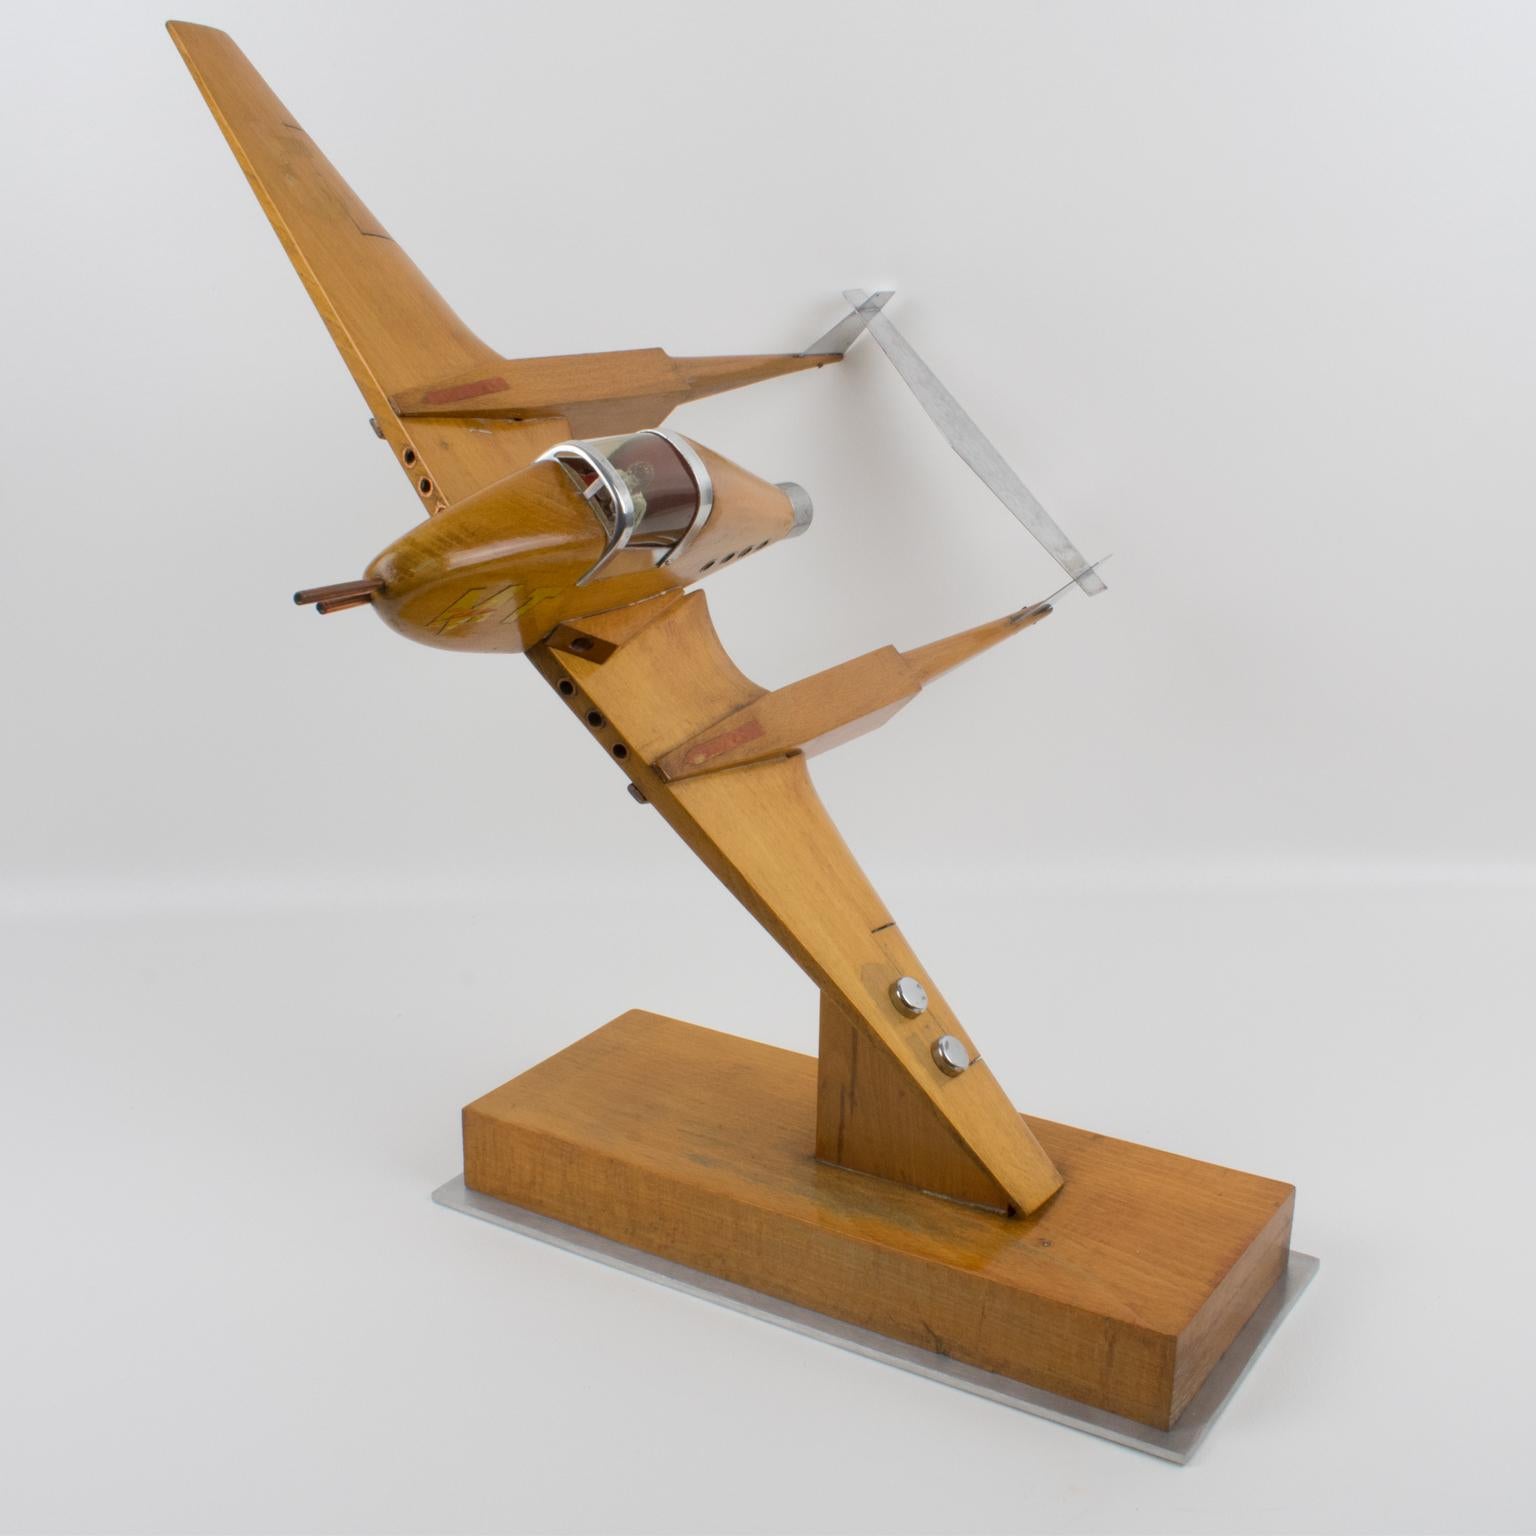 Stunning war airplane aviation model. It is a large wooden airplane model with lots of details accents, visibly equipped for aerial combat with cannons and machine guns. Stands on thick wood and aluminum plinth. The airplane is even complete with